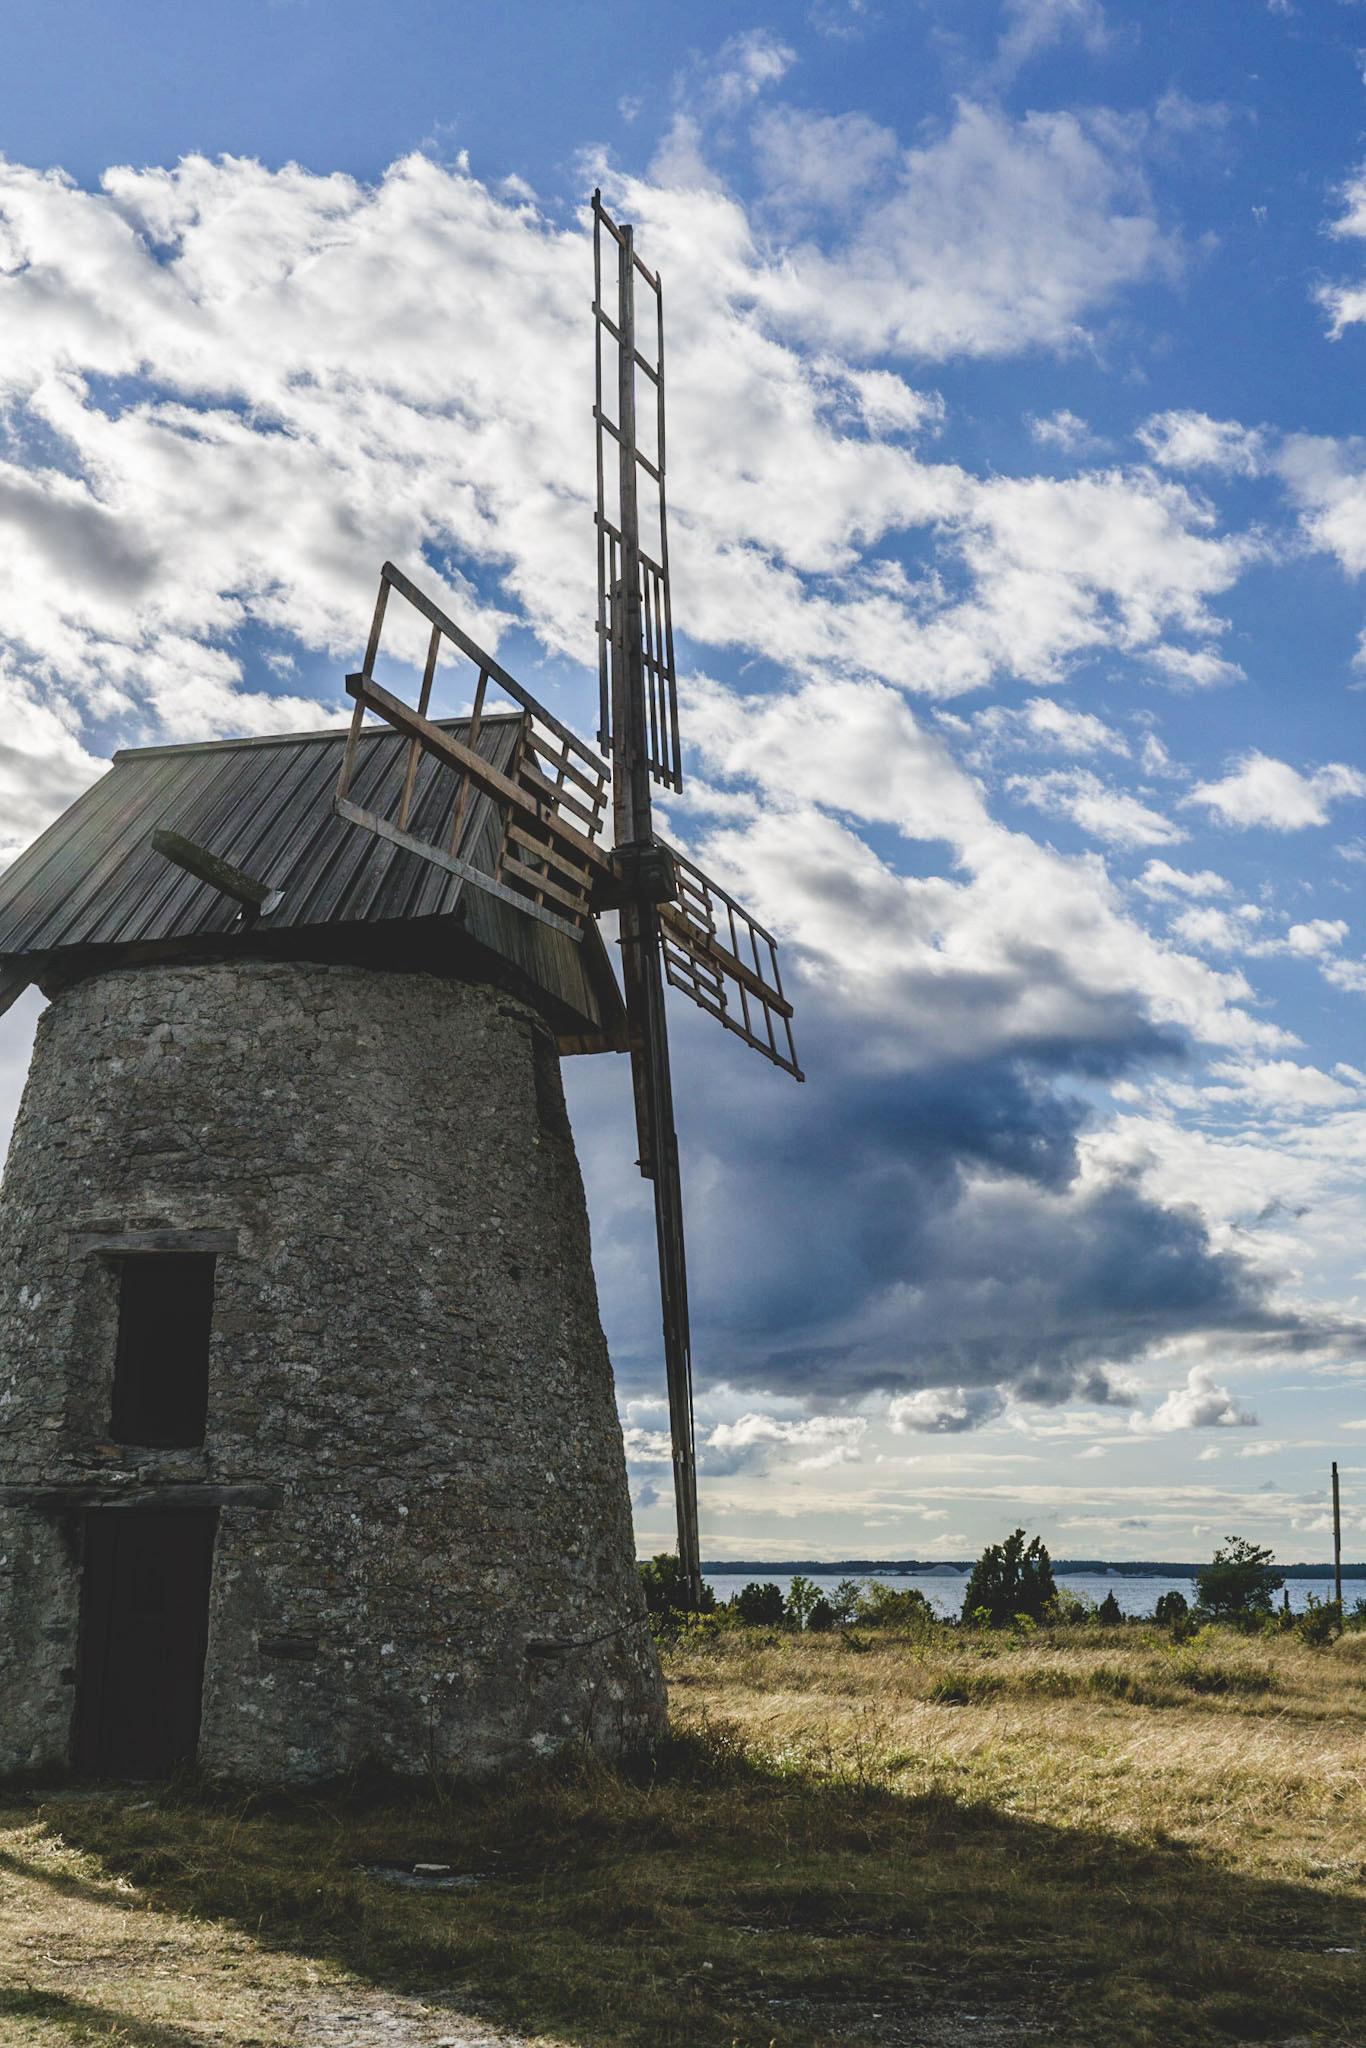 Sony a6000 sample photo. Windmill on the island photography